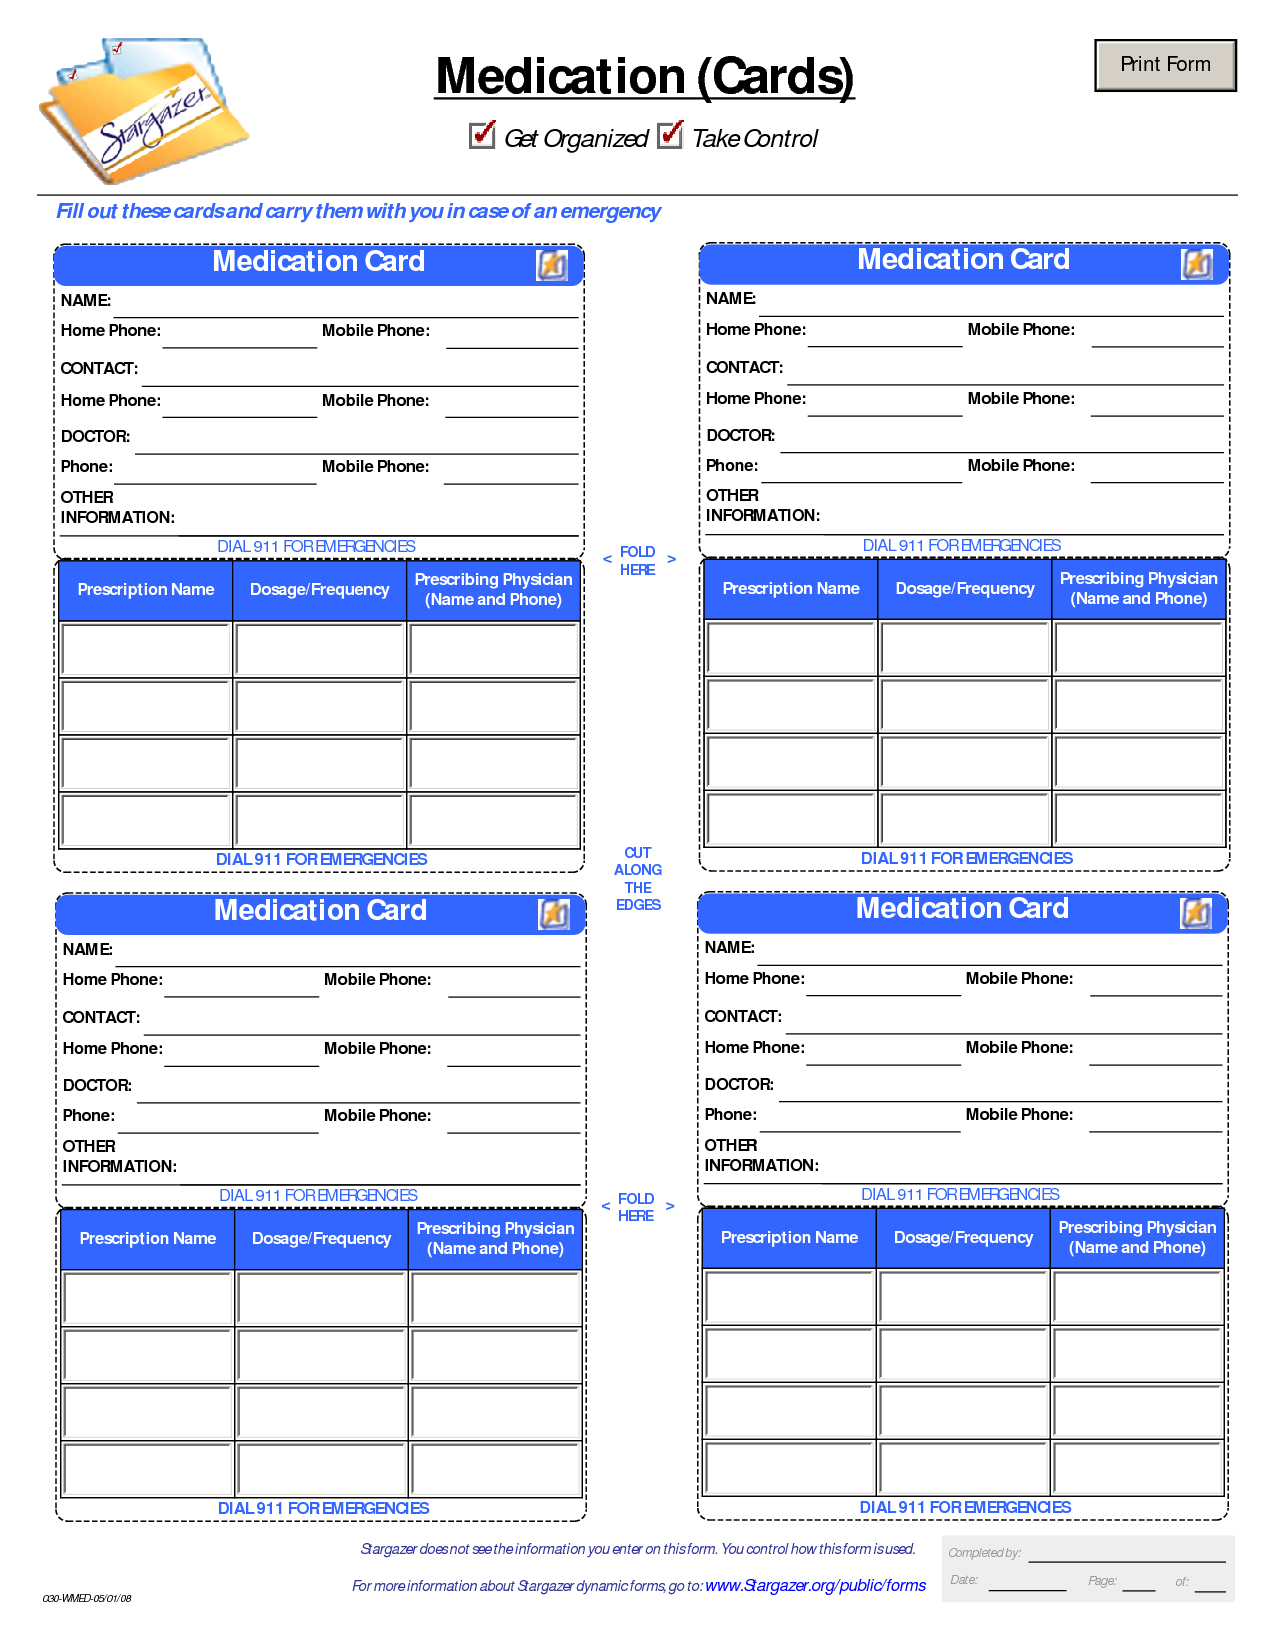 Patient Medication Card Template | Medication List, Medical Pertaining To Med Card Template